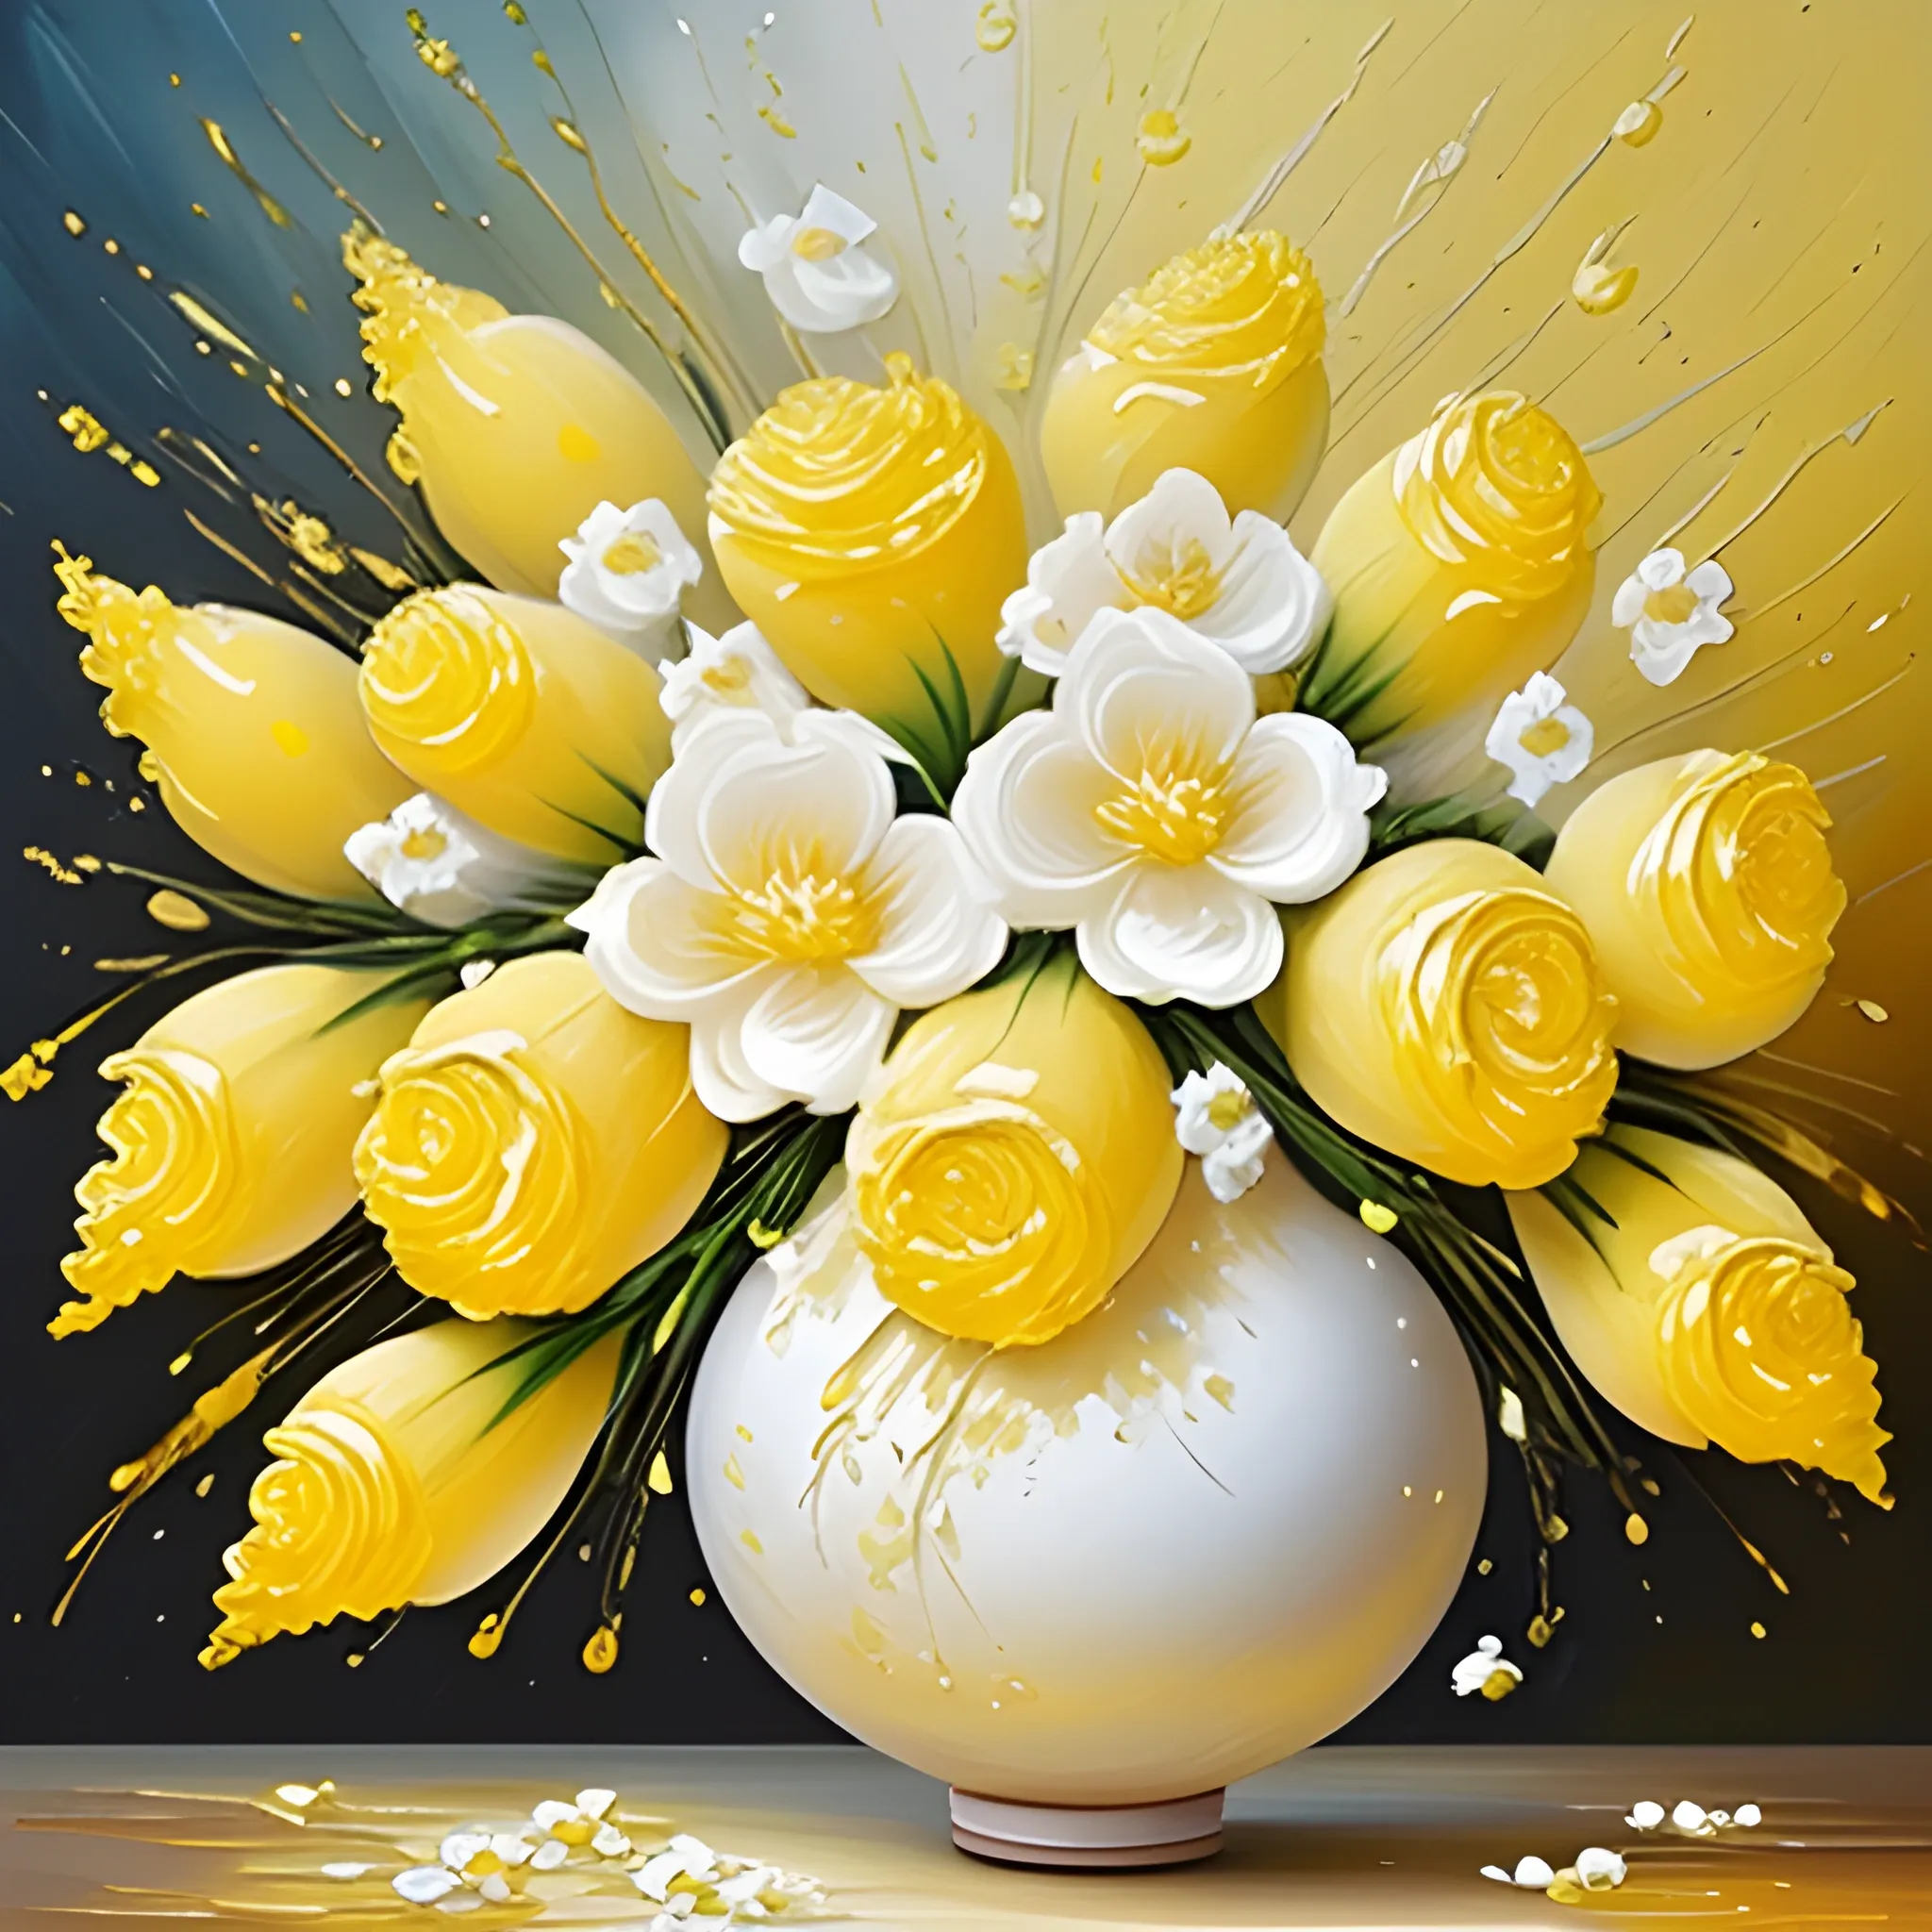 Stunning yellow and white Flowers Art, magical, diaphanous, thick impasto painting masterpiece, Oil Painting, Oil Painting, Oil Painting, Oil Painting, Oil Painting